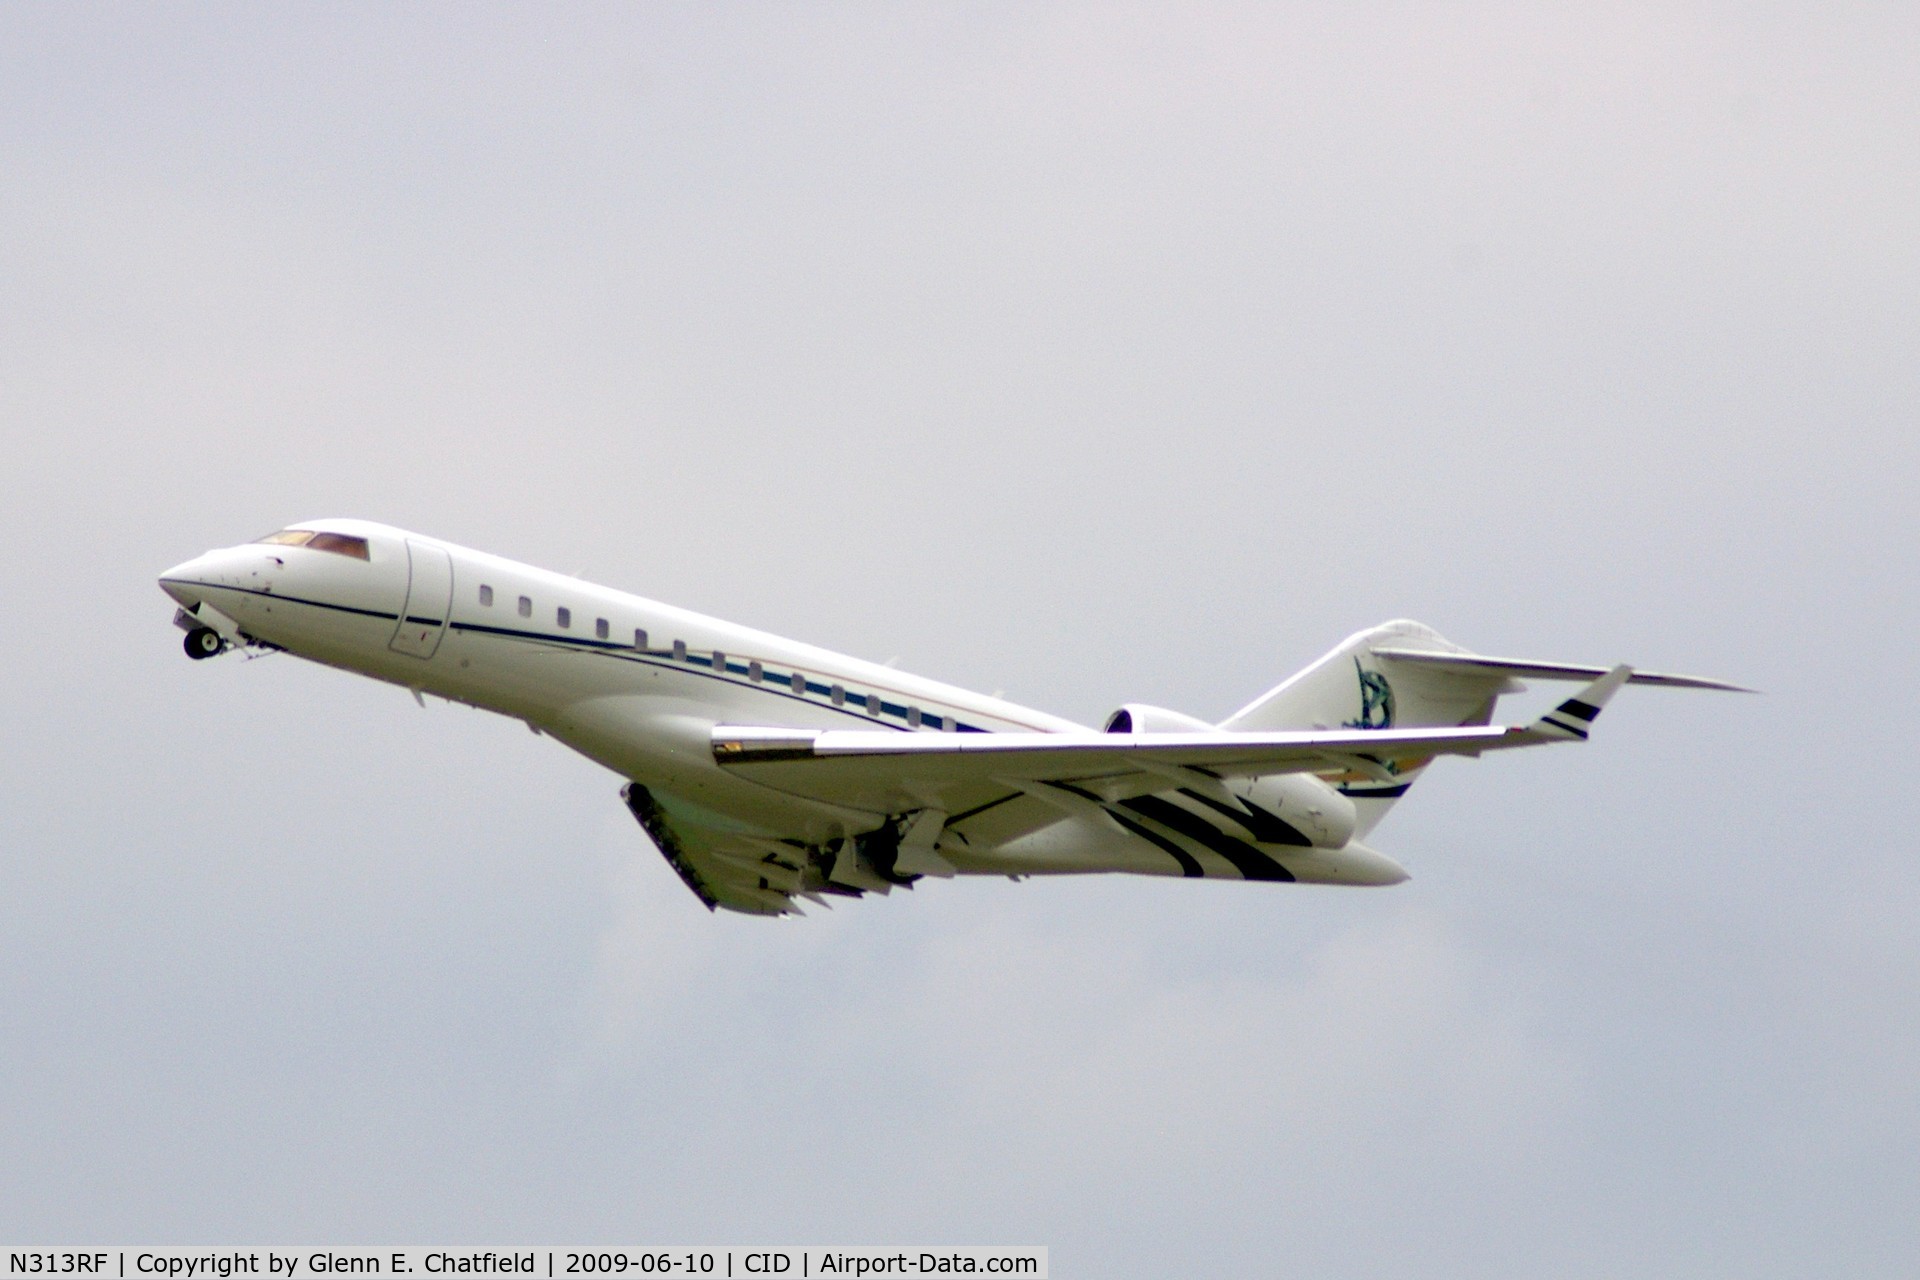 N313RF, 2006 Bombardier BD-700-1A10 Global Express C/N 9194, Climbing out after departing Runway 9